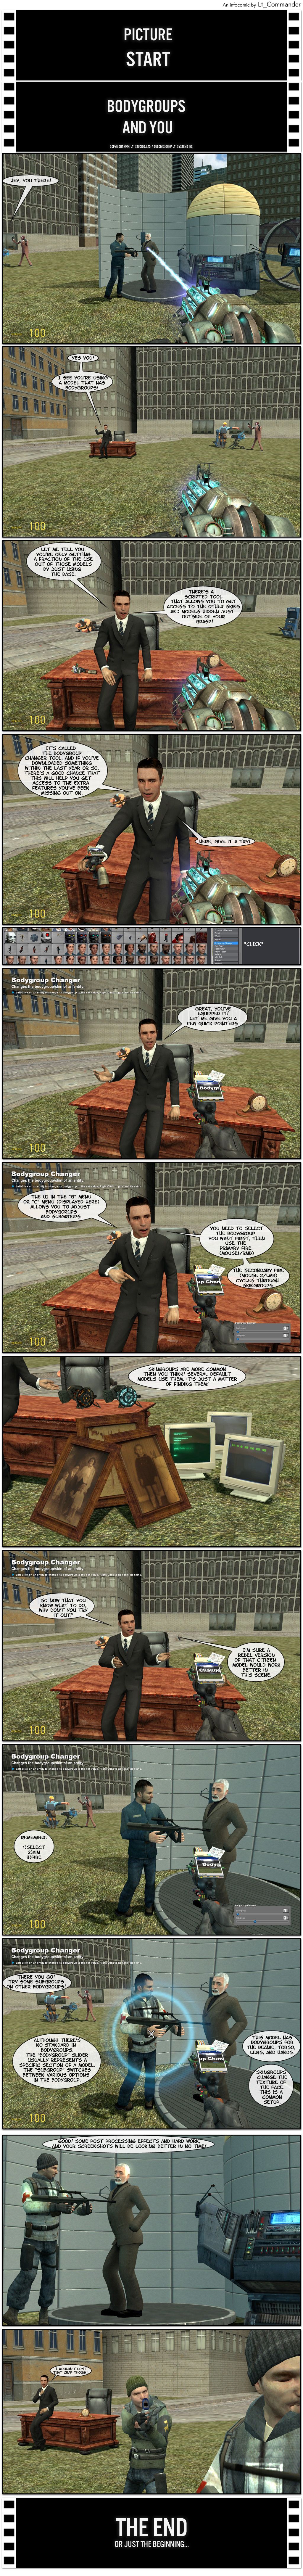 A Garry’s Mod player is posing Doctor Breen being held at gunpoint by a citizen when someone calls out hey, you there. The player turns to find Lt_Commander sitting on his desk nearby. Lt_C greets them and says he sees they’re using a model that has bodygroups. He reveals they’re only getting a fraction of the use out of those models by just using the base and that there’s a scripted tool that allows you to get access to the other skins and models hidden just outside of your grasp. He says it’s called the Bodygroup Changer Tool and if they’ve downloaded something within the last year or so, there’s a good chance that that will help them get access to the extra features you’ve been missing out on. He hands the player a tool gun and tells them to give it a try. The player goes to the Garry’s Mod menu and selects Bodygroup Changer, equipping the tool. Lt_C says great, they’ve equipped it, then offers to give a few quick pointers. He explains the UI in the Q menu or C menu allows you to adjust bodygroups and subgroups and you need to select the bodygroup you want first, then use the primary fire (left mouse click), while the secondary fire (right mouse click) cycles through skingroups. He points out skingroups are more common than you think and several default models use them, it’s just a matter of finding them. A few paintings and two computer screens appear on the ground, revealing different textures for the same models. Lt_C invites the player to try it out now that they know what to do, adding that a rebel version of that citizen model would work better in this scene. He tells the player to remember: first, select, then aim, then fire. The player changes the citizen’s shirt to a medic outfit and Lt_C says there you go, then suggests they try some subgroups on other bodygroups, noting that, although there’s no standard in bodygroups, the bodygroup slider usually represents a specific section of a model and the subgroup switches between various options in the bodygroup. Lt_C adds that that model has bodygroups for the beanie, torso, legs and hands and the skingroups change the texture of the face, which is a common setup. The player changes the model to a medic with a beanie and Lt_C says good, with some post-processing effects and hard work, their screenshots will be looking better in no time, then whispers he wouldn’t post that crap though. The end.